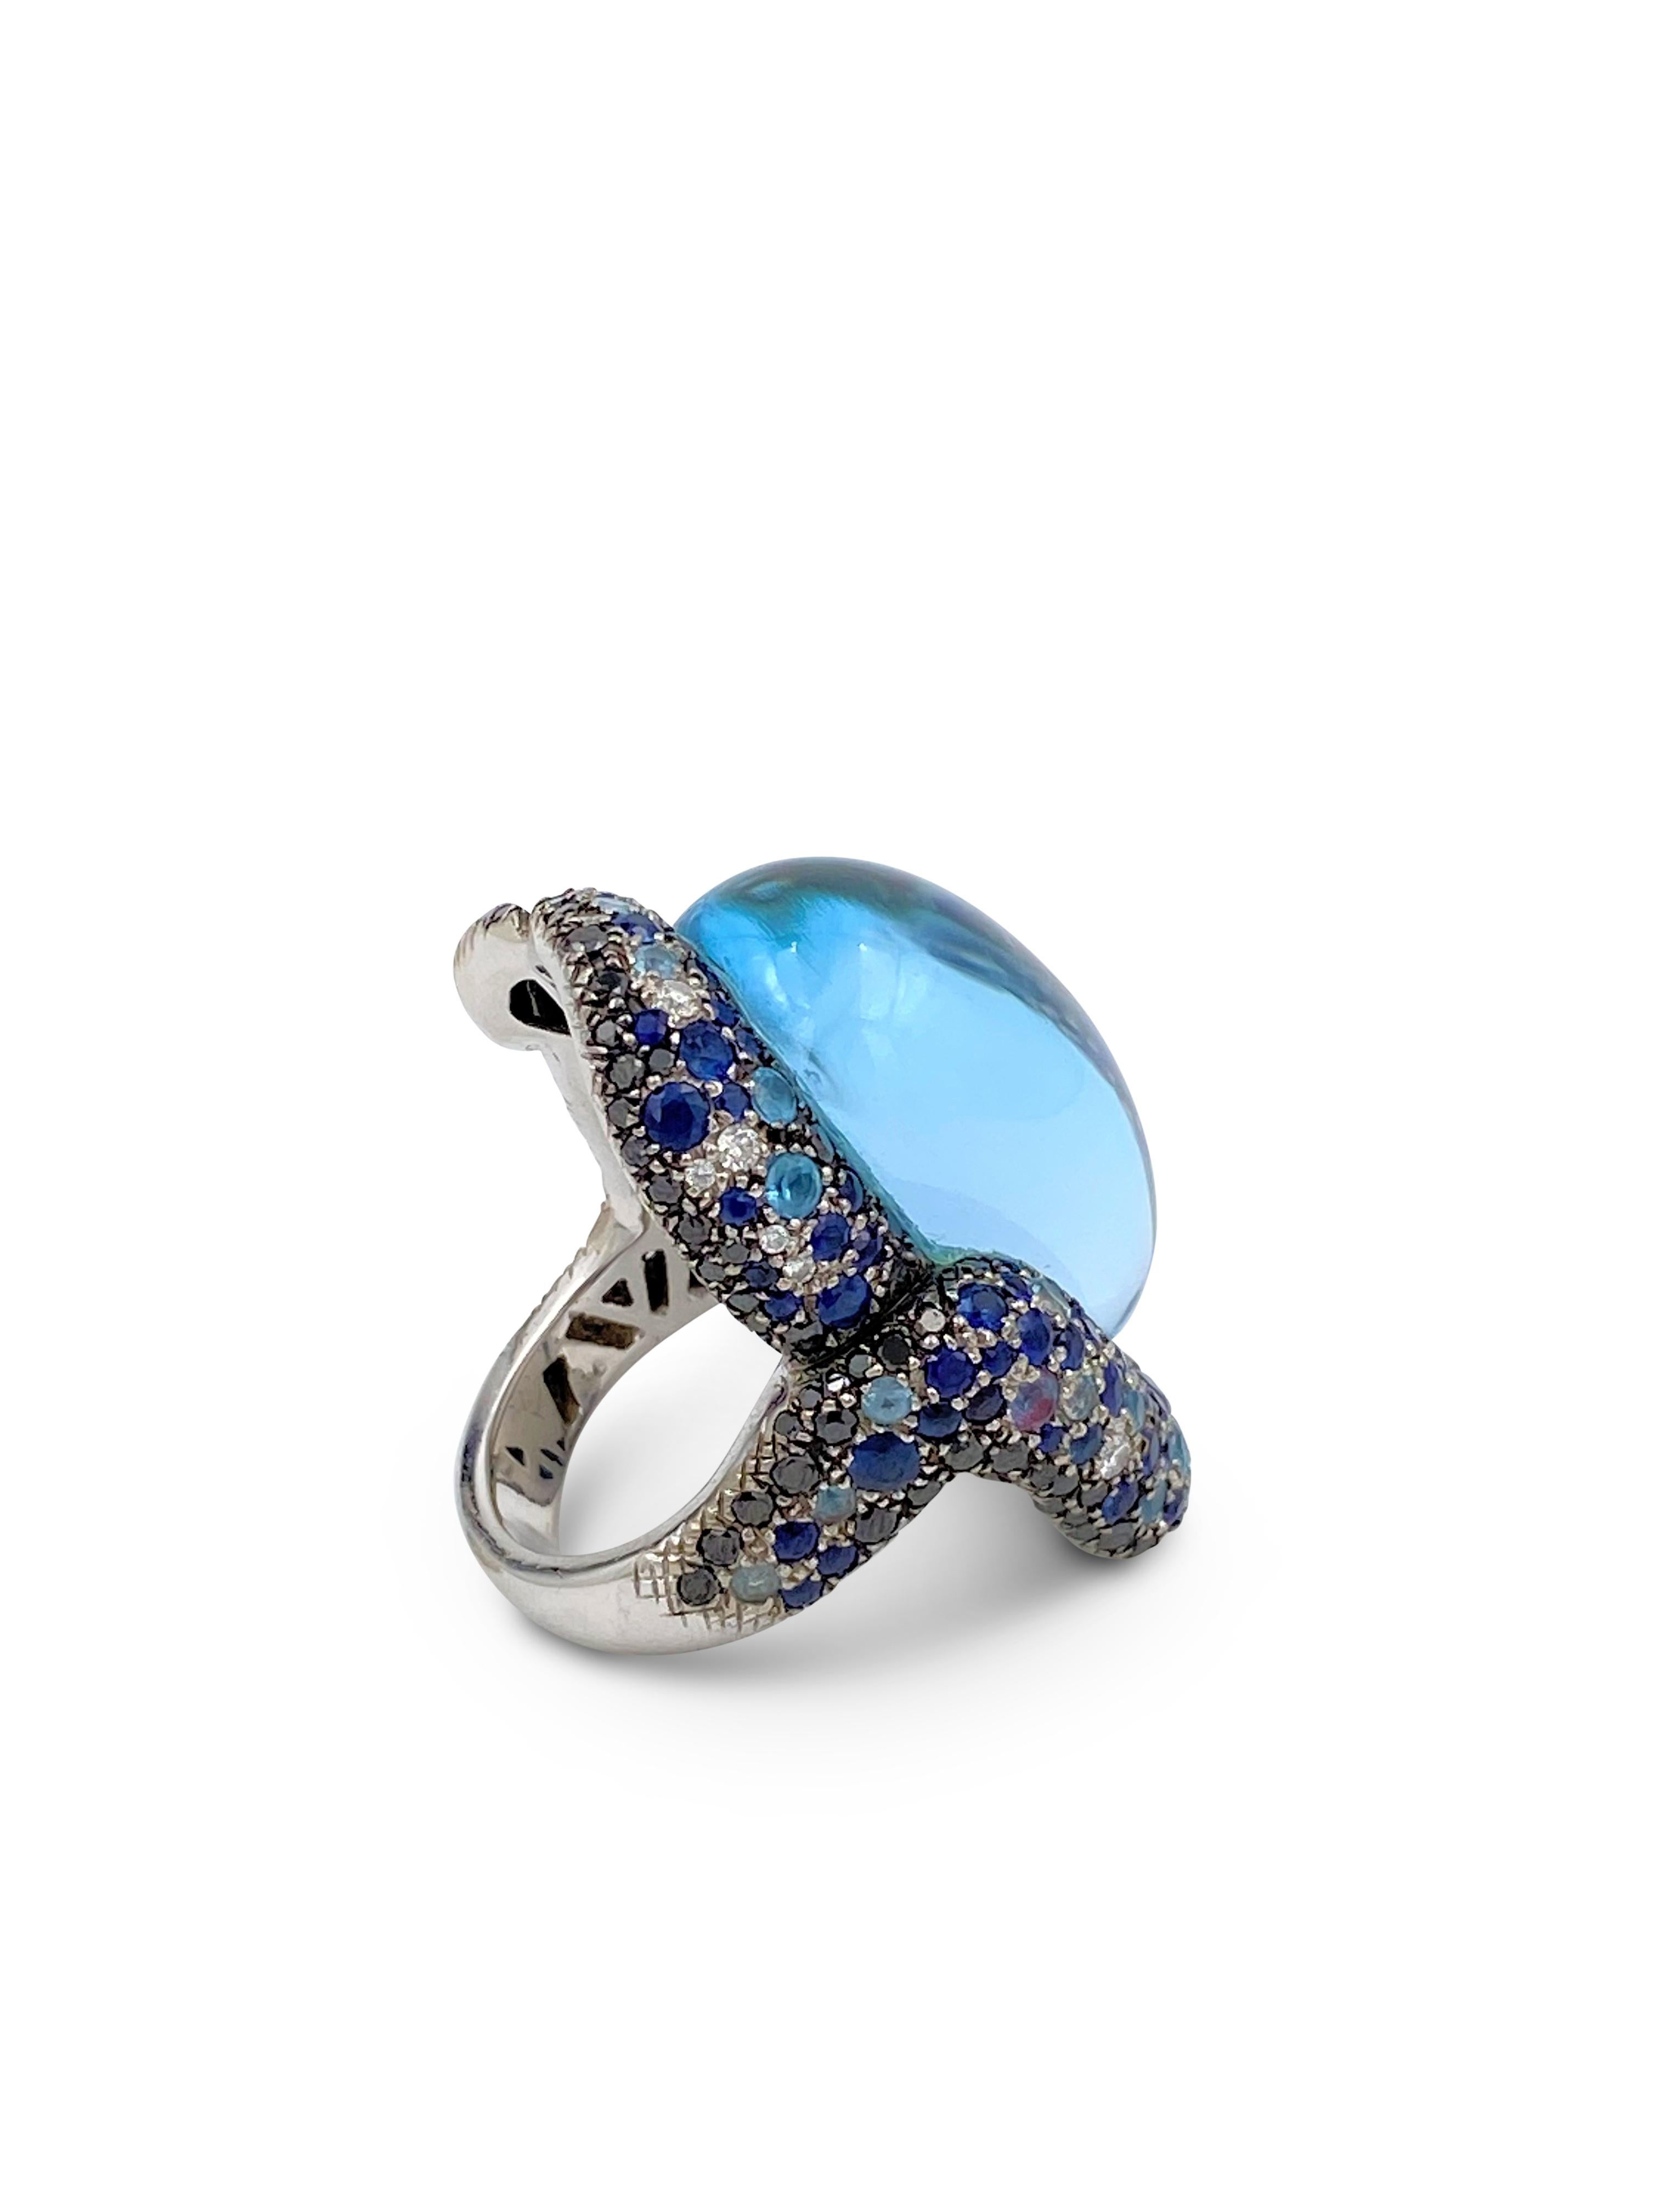 A bold Vasari cocktail ring crafted in 18 karat white gold featuring a cabochon blue topaz stone and set with an estimated 3.00 carats of sapphires as well as black and white diamonds weighing approximately 2.50 carats. Signed Vasari with hallmarks.